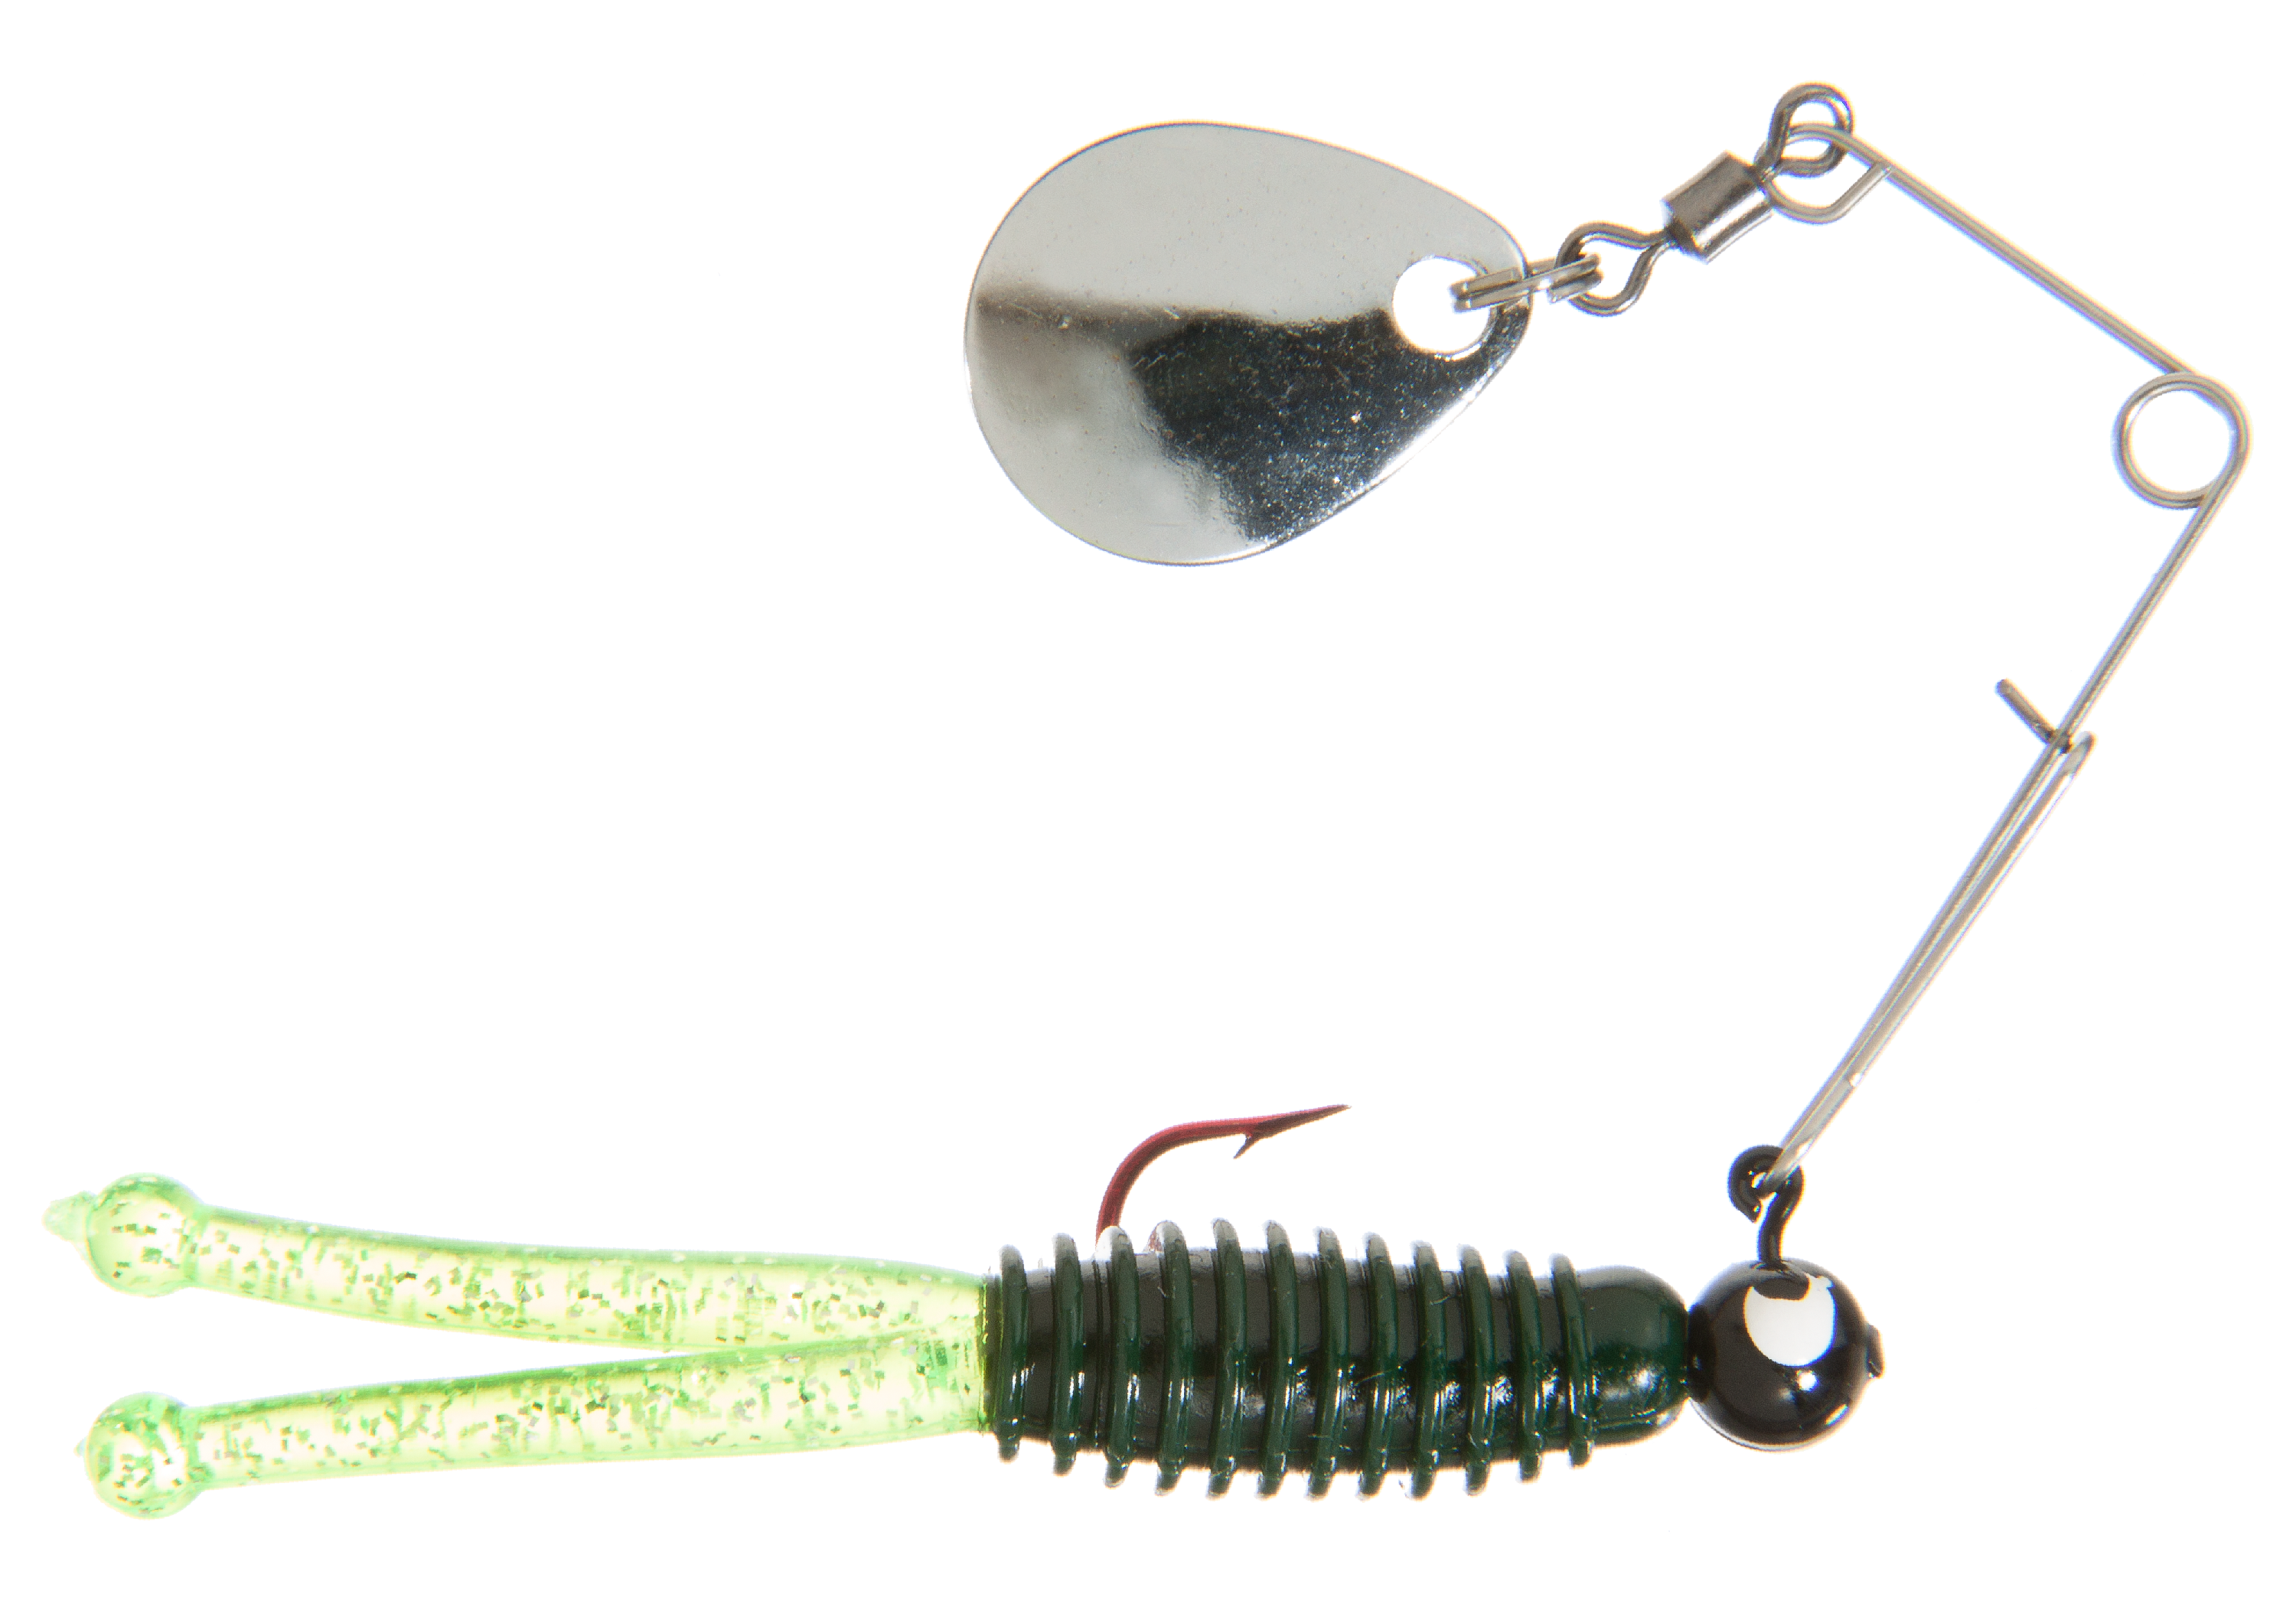 Bass Pro Shops Uncle Buck's Panfish Creatures Jake with Spinner - Black Chartreuse Silver Flake